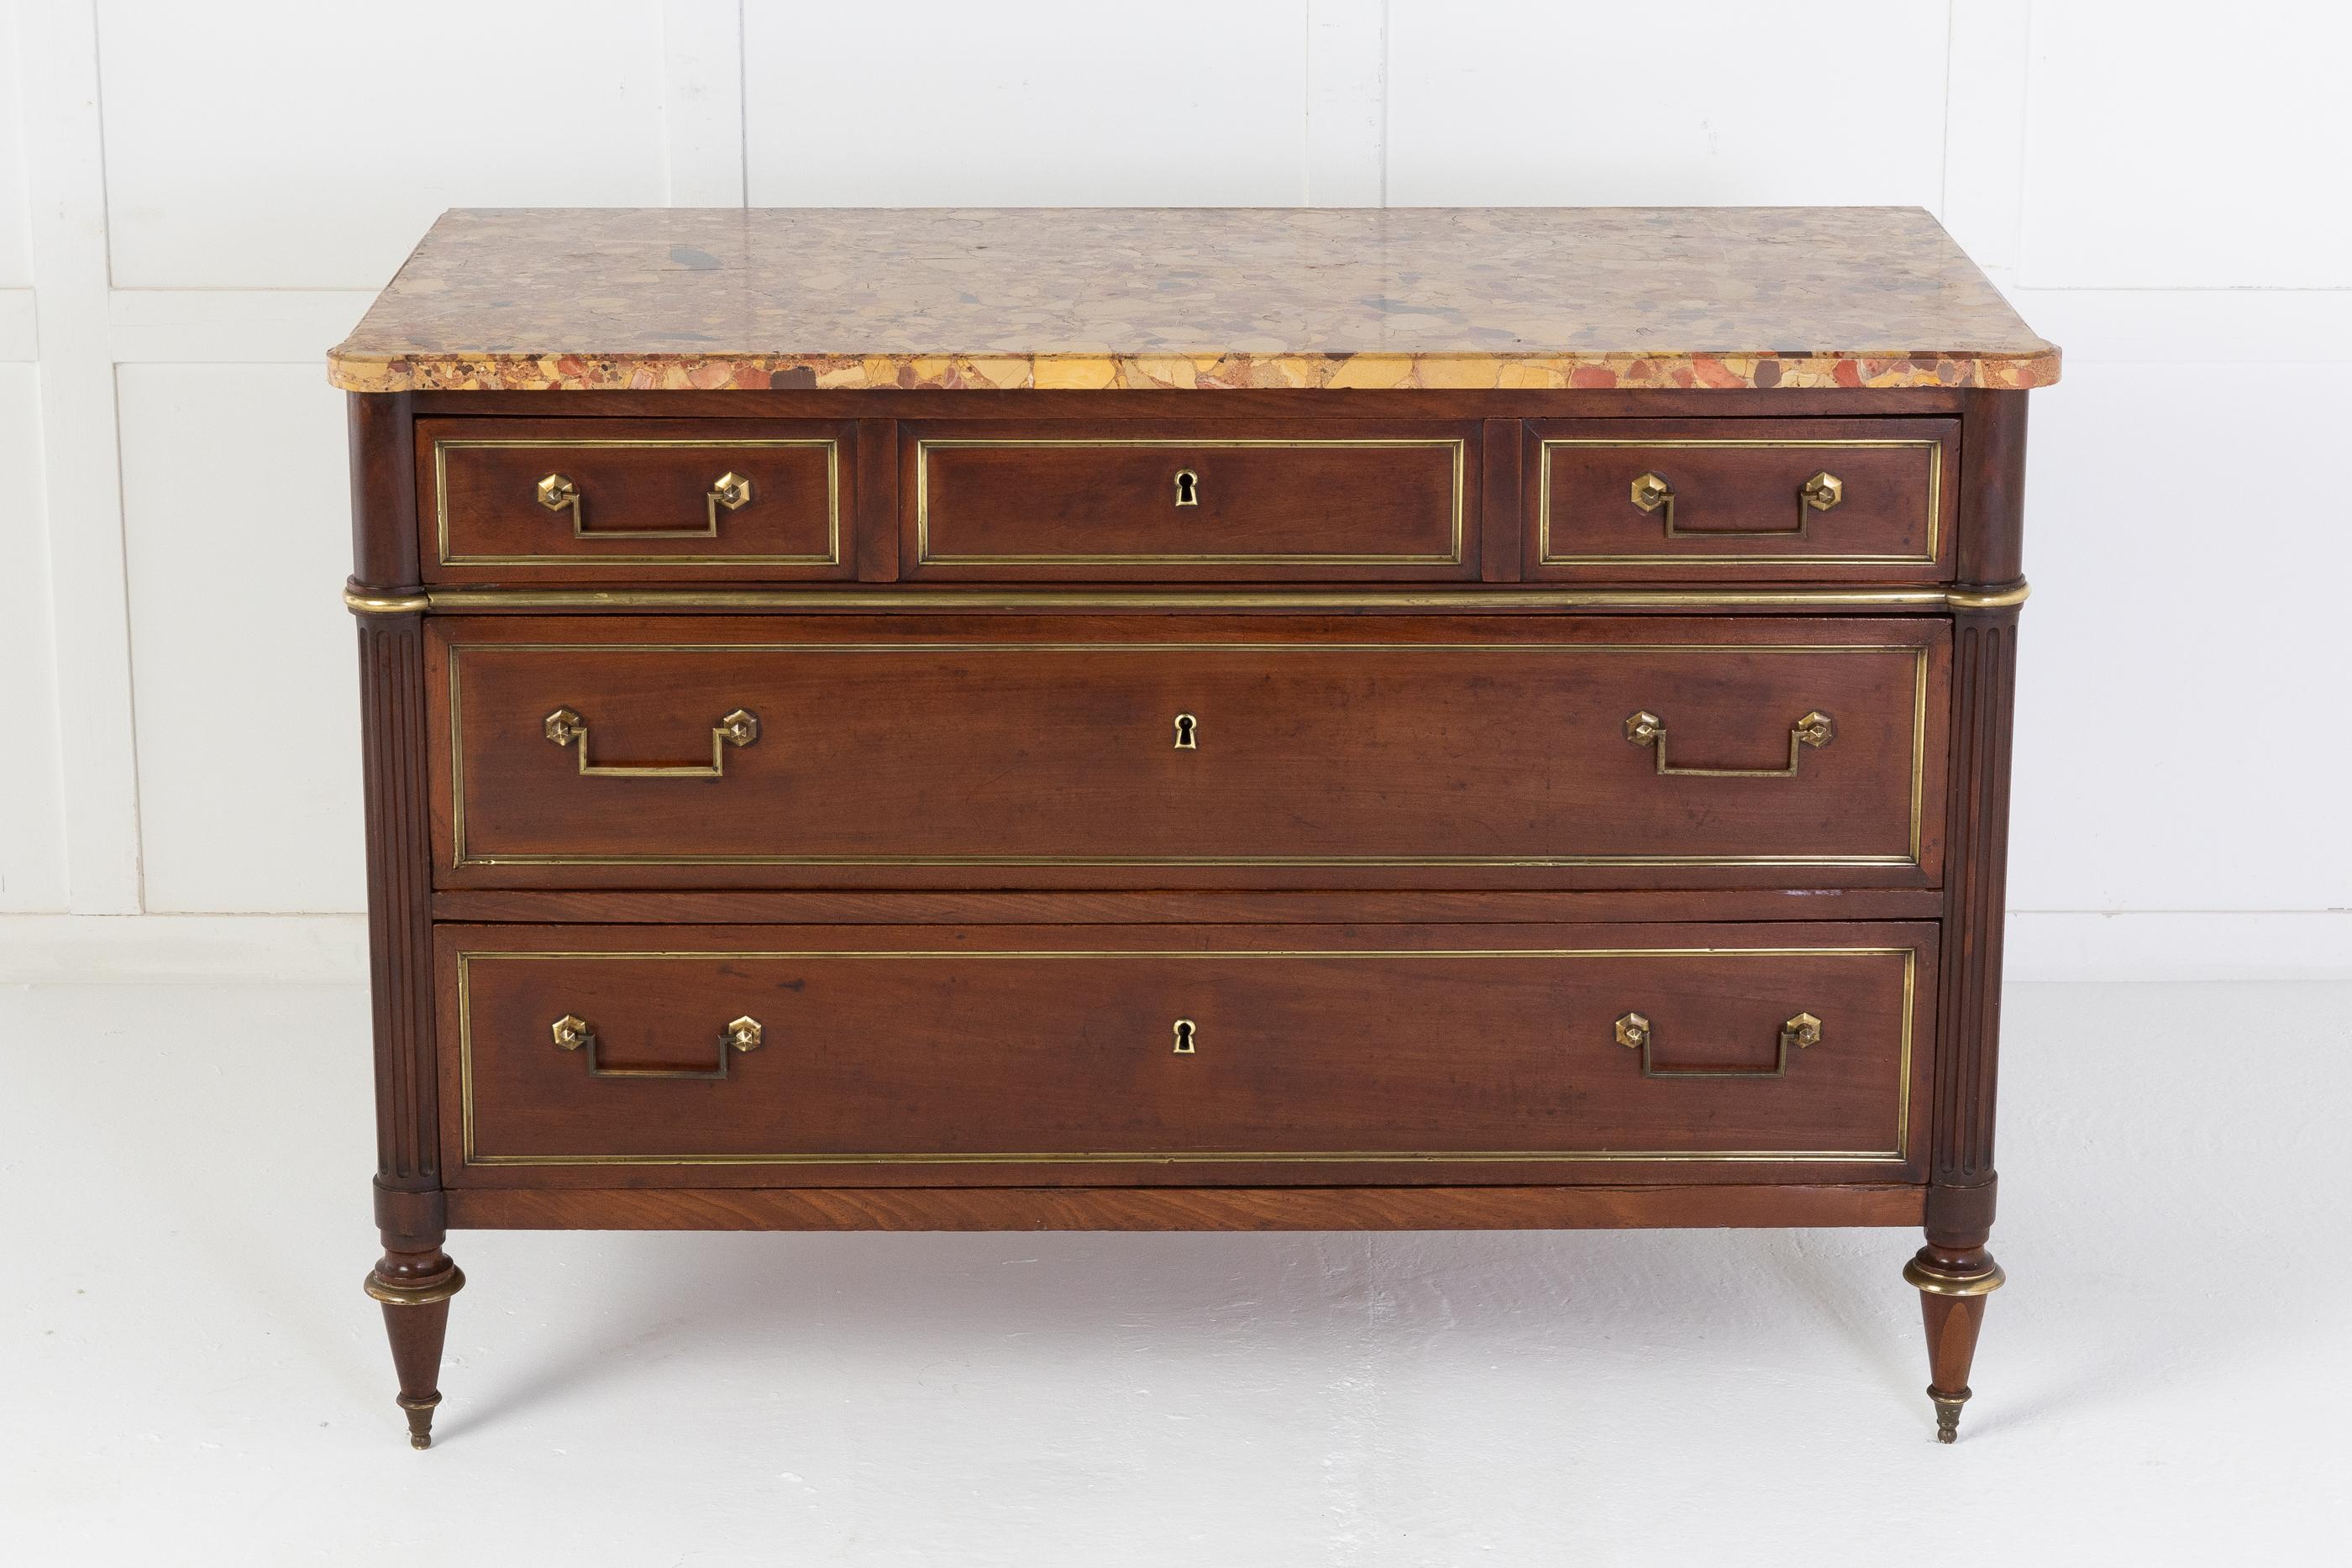 Well proportioned French 19th century commode with a very nice marble top. Three drawers across the top and two below, each drawer having brass panelled mounts and rectangular handles flanked by fluted turned columns. Raised on tapering toupie feet